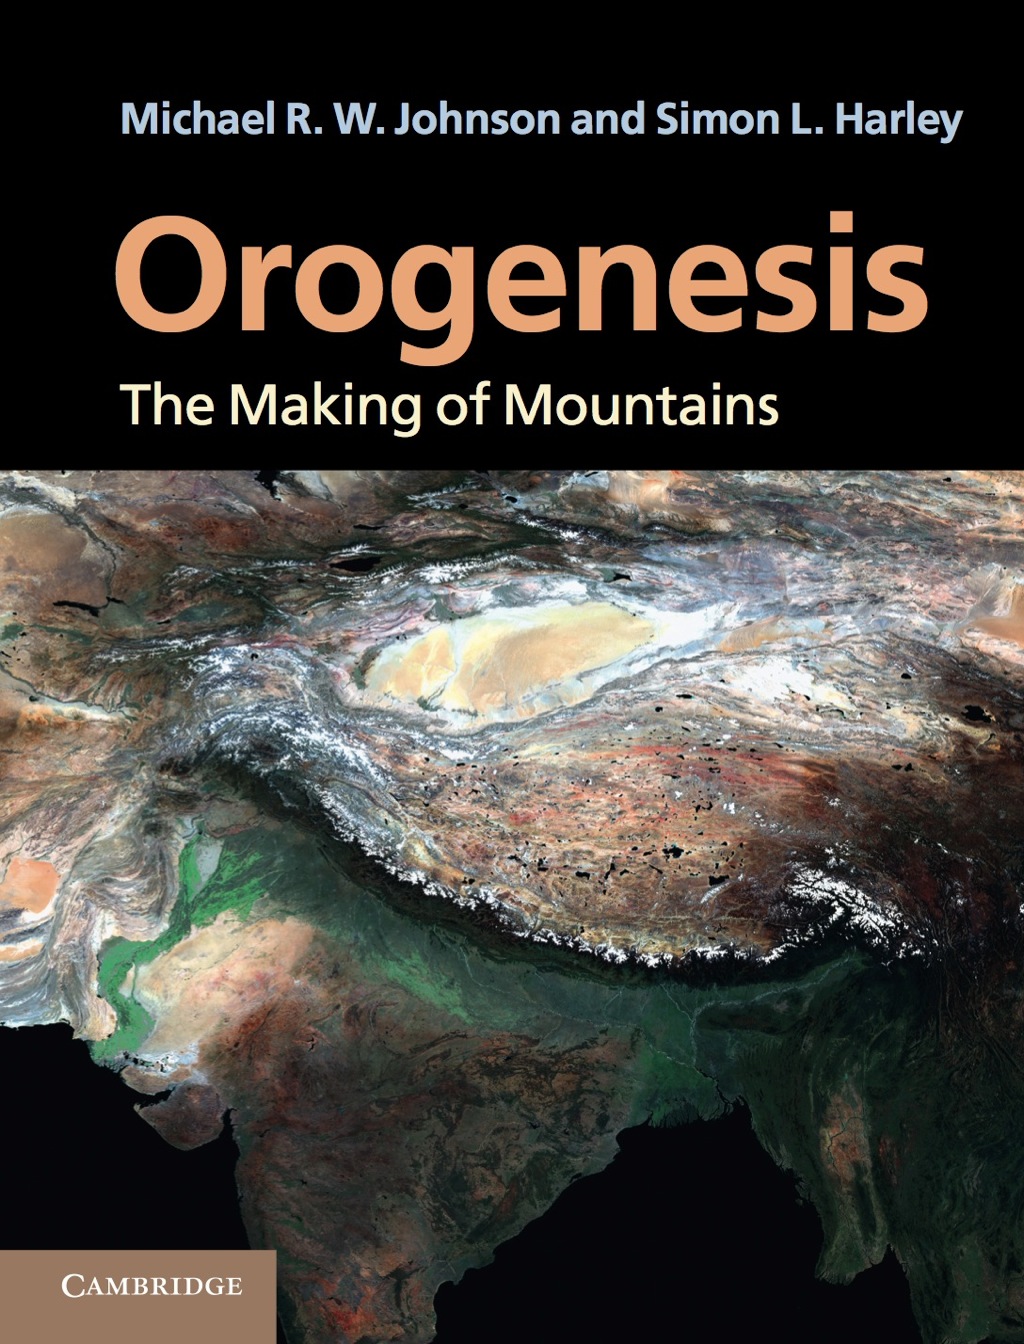 Orogenesis: The Making of Mountains (eBook) - Michael R. W. Johnson,